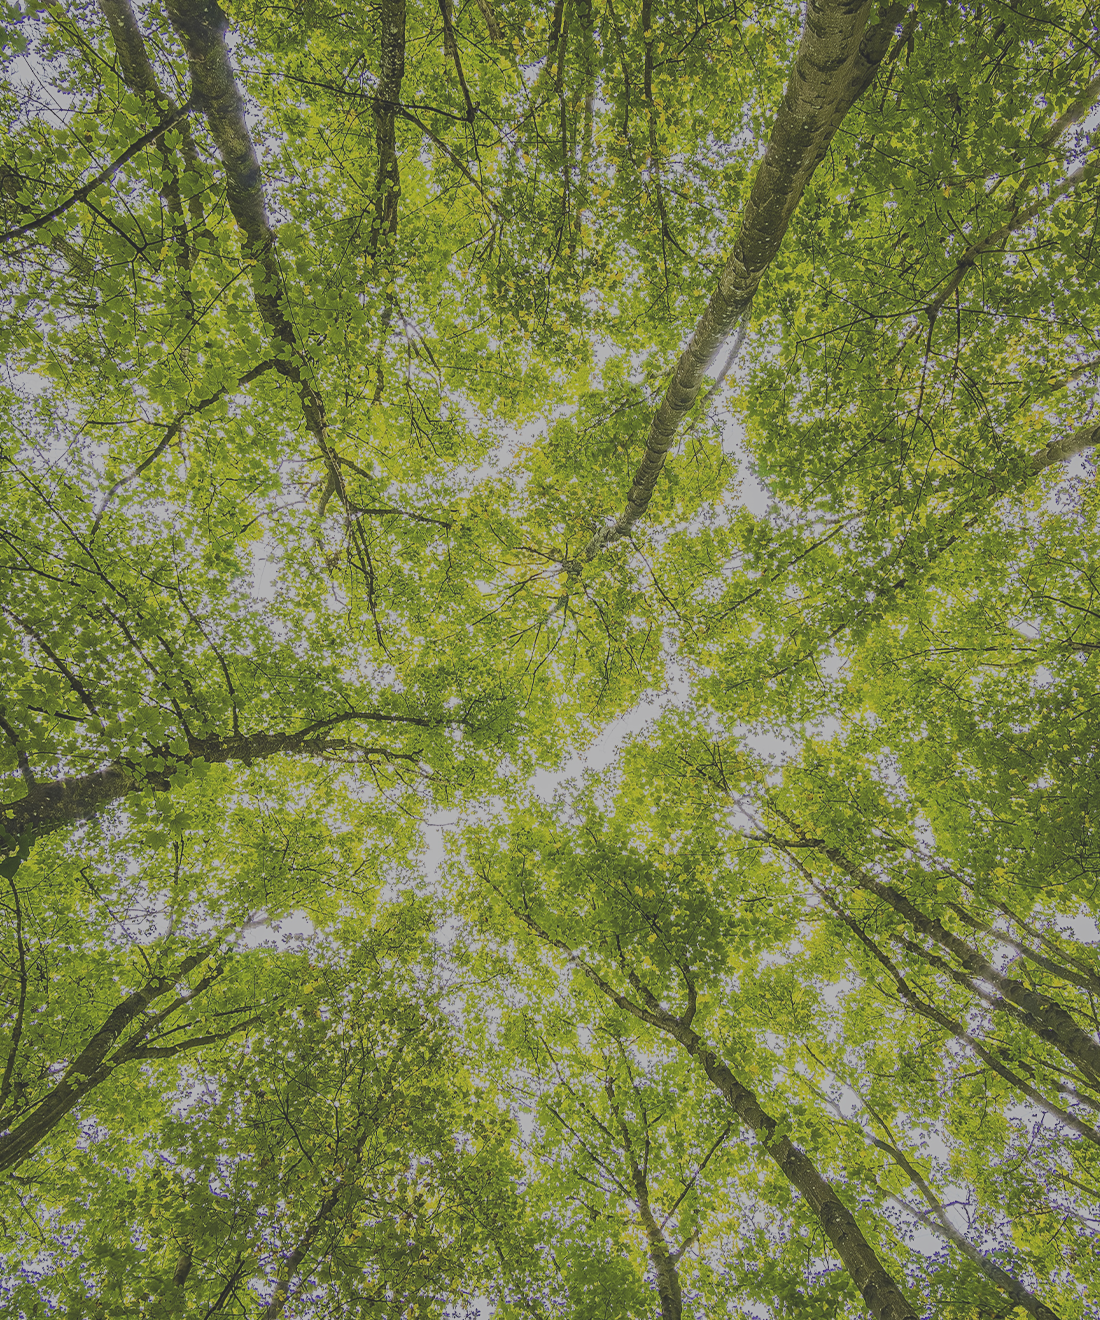 image taken from the ground, looking up into a canopy of trees with sunlight breaking through the gaps